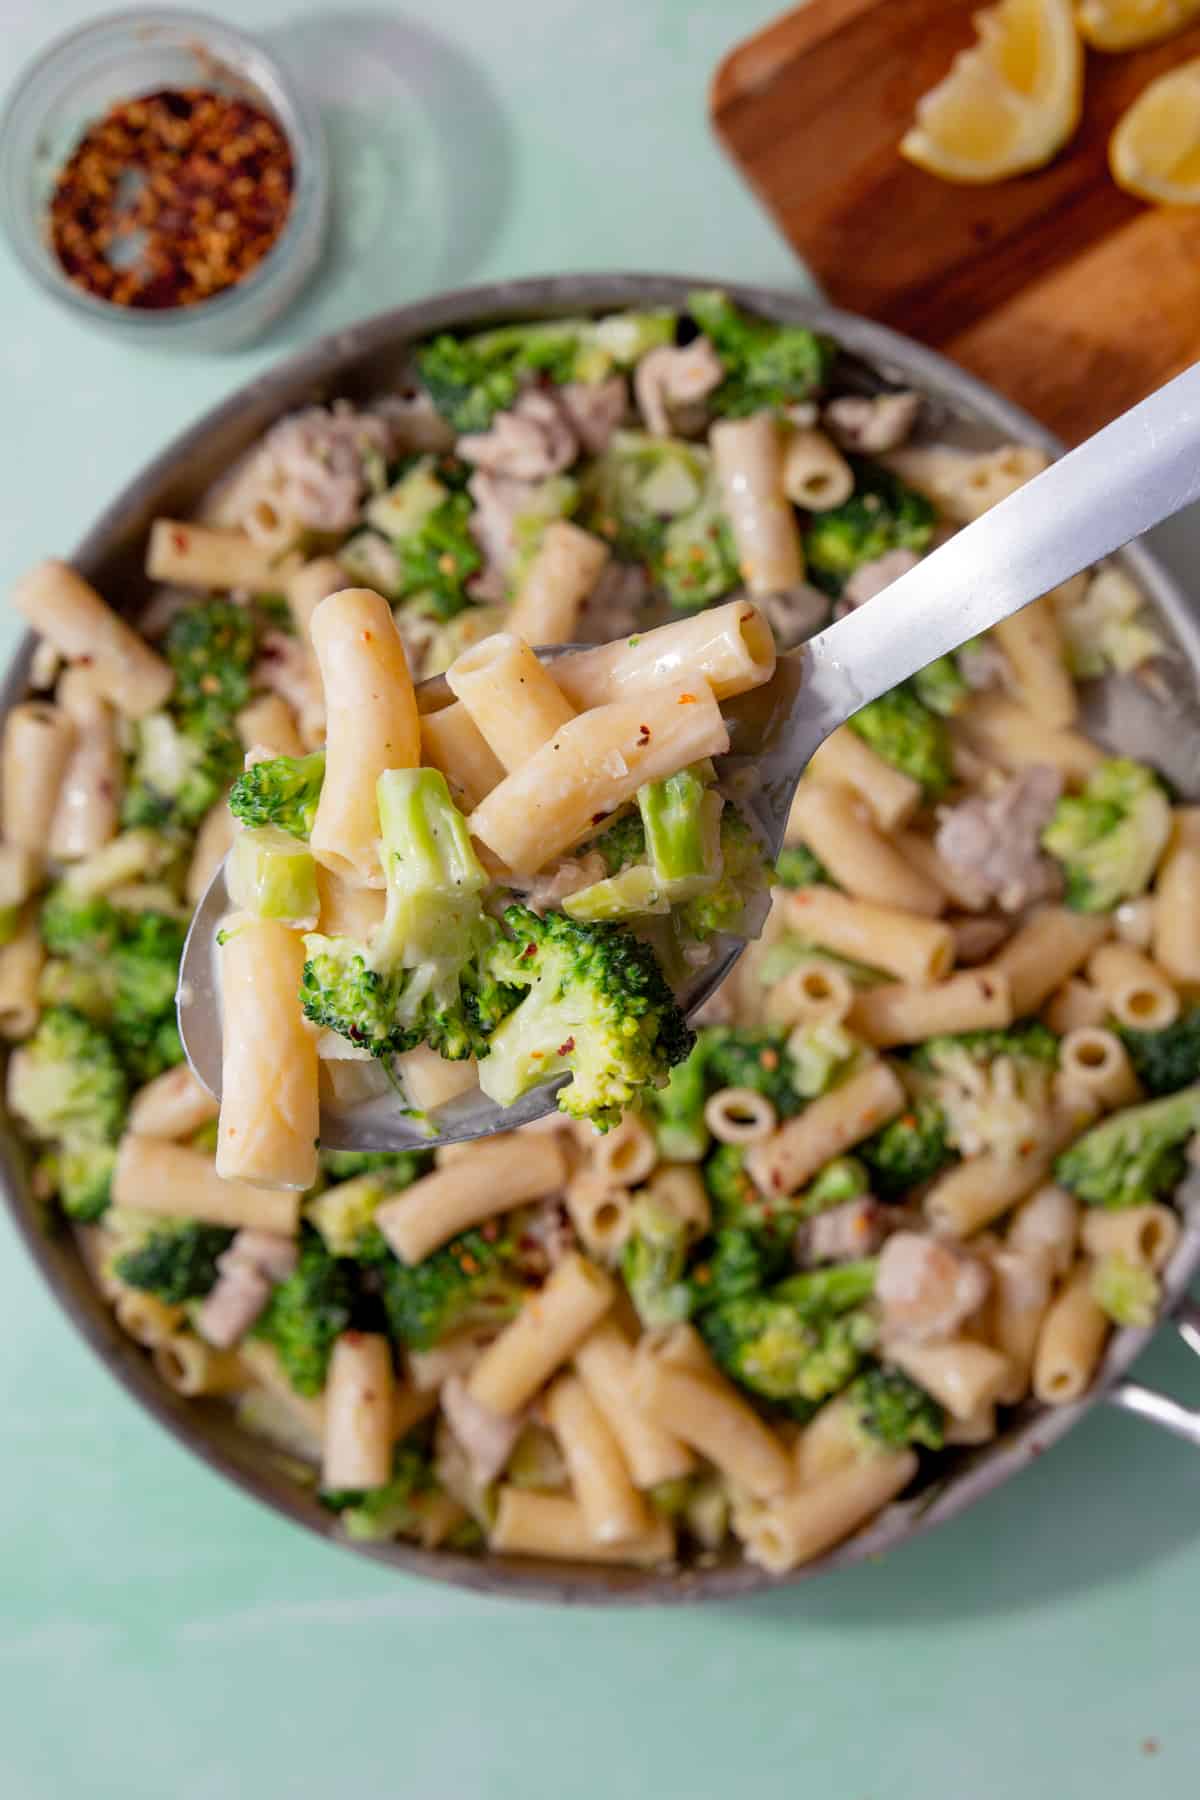 A large pan with broccoli, rigatoni pasta and chicken pieces, with a large metal spoon of the pasta showing above the pan.  Lemon wedges and chilli flakes in partial veiw behind the pan.